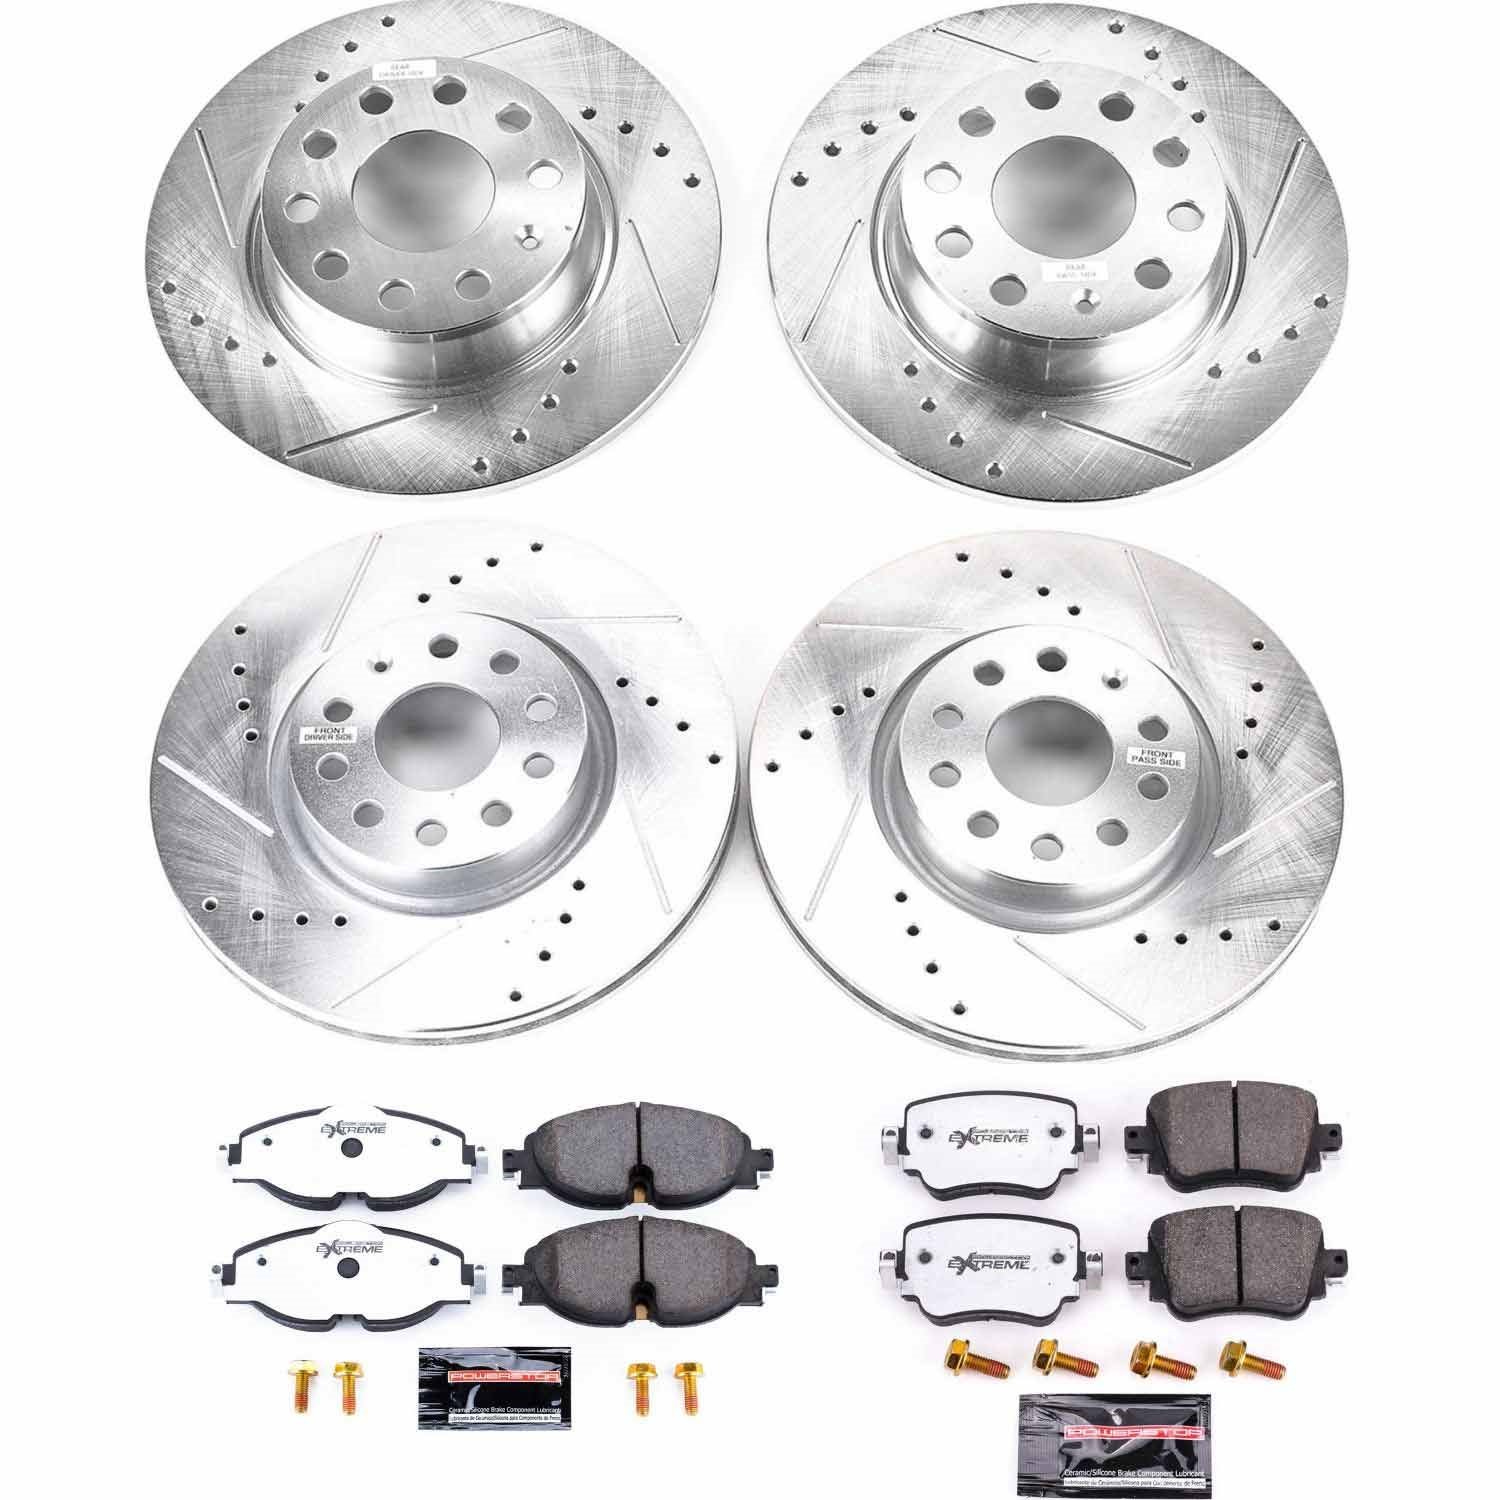 Z26 Extreme Performance Complete Brake Pad and Rotor Set Fits 2019 Volkswagen Golf Alltrack [Front/Rear]